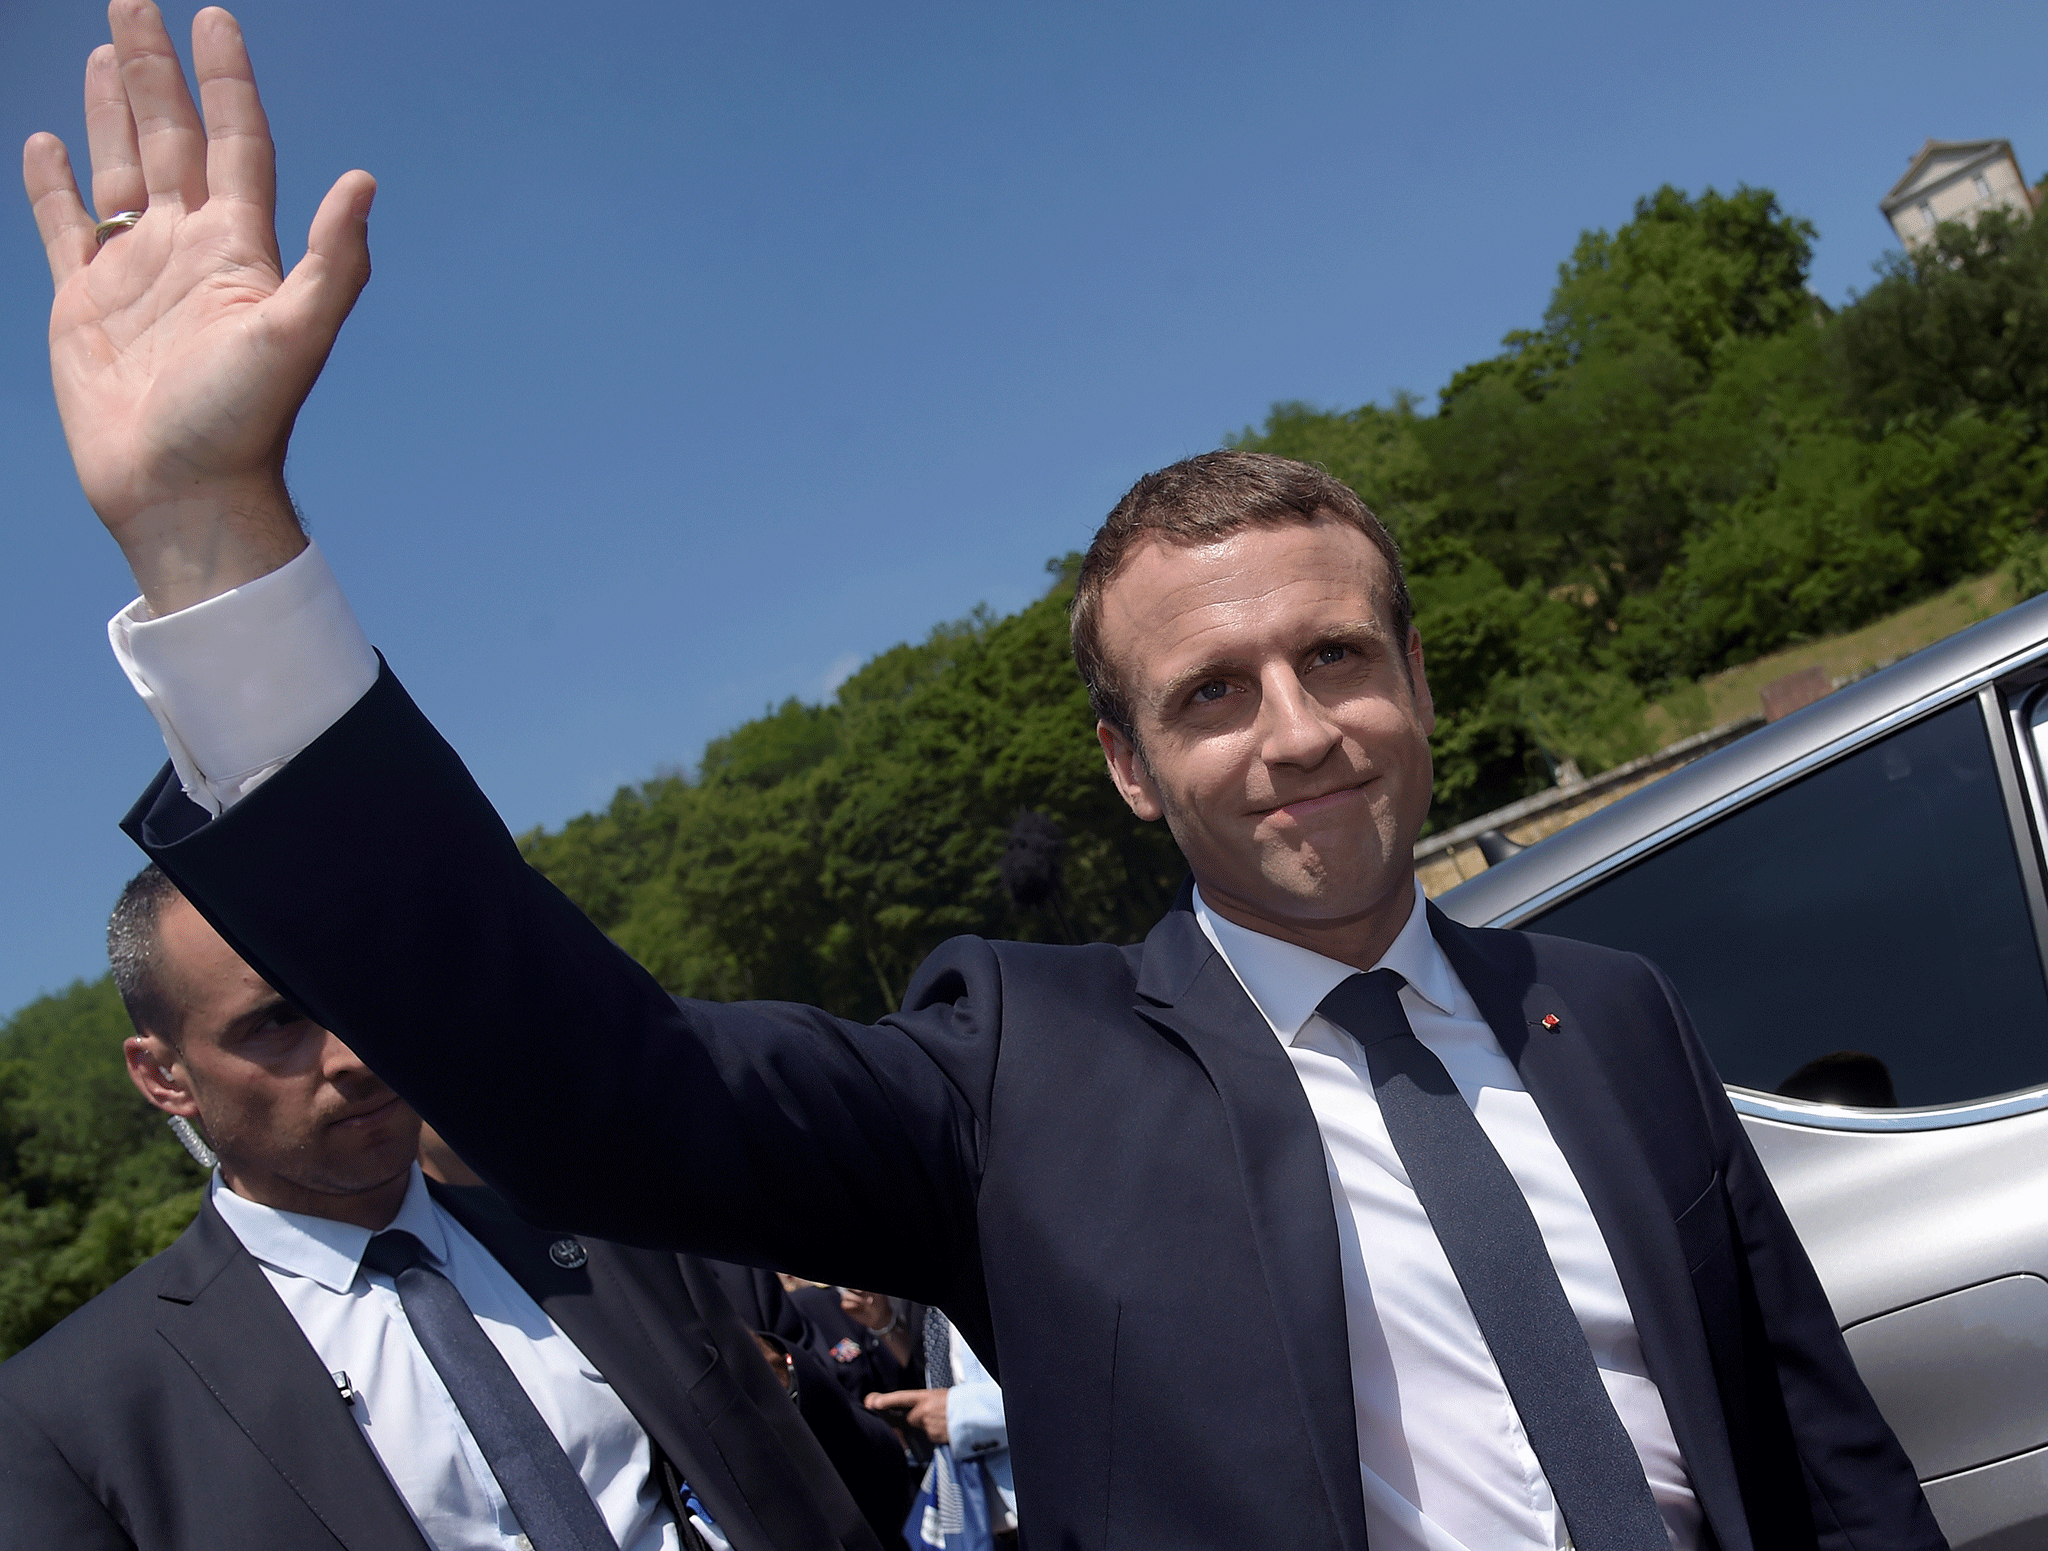 Emmanuel Macron is a consensus politician, who is prepared to listen, and to compromise